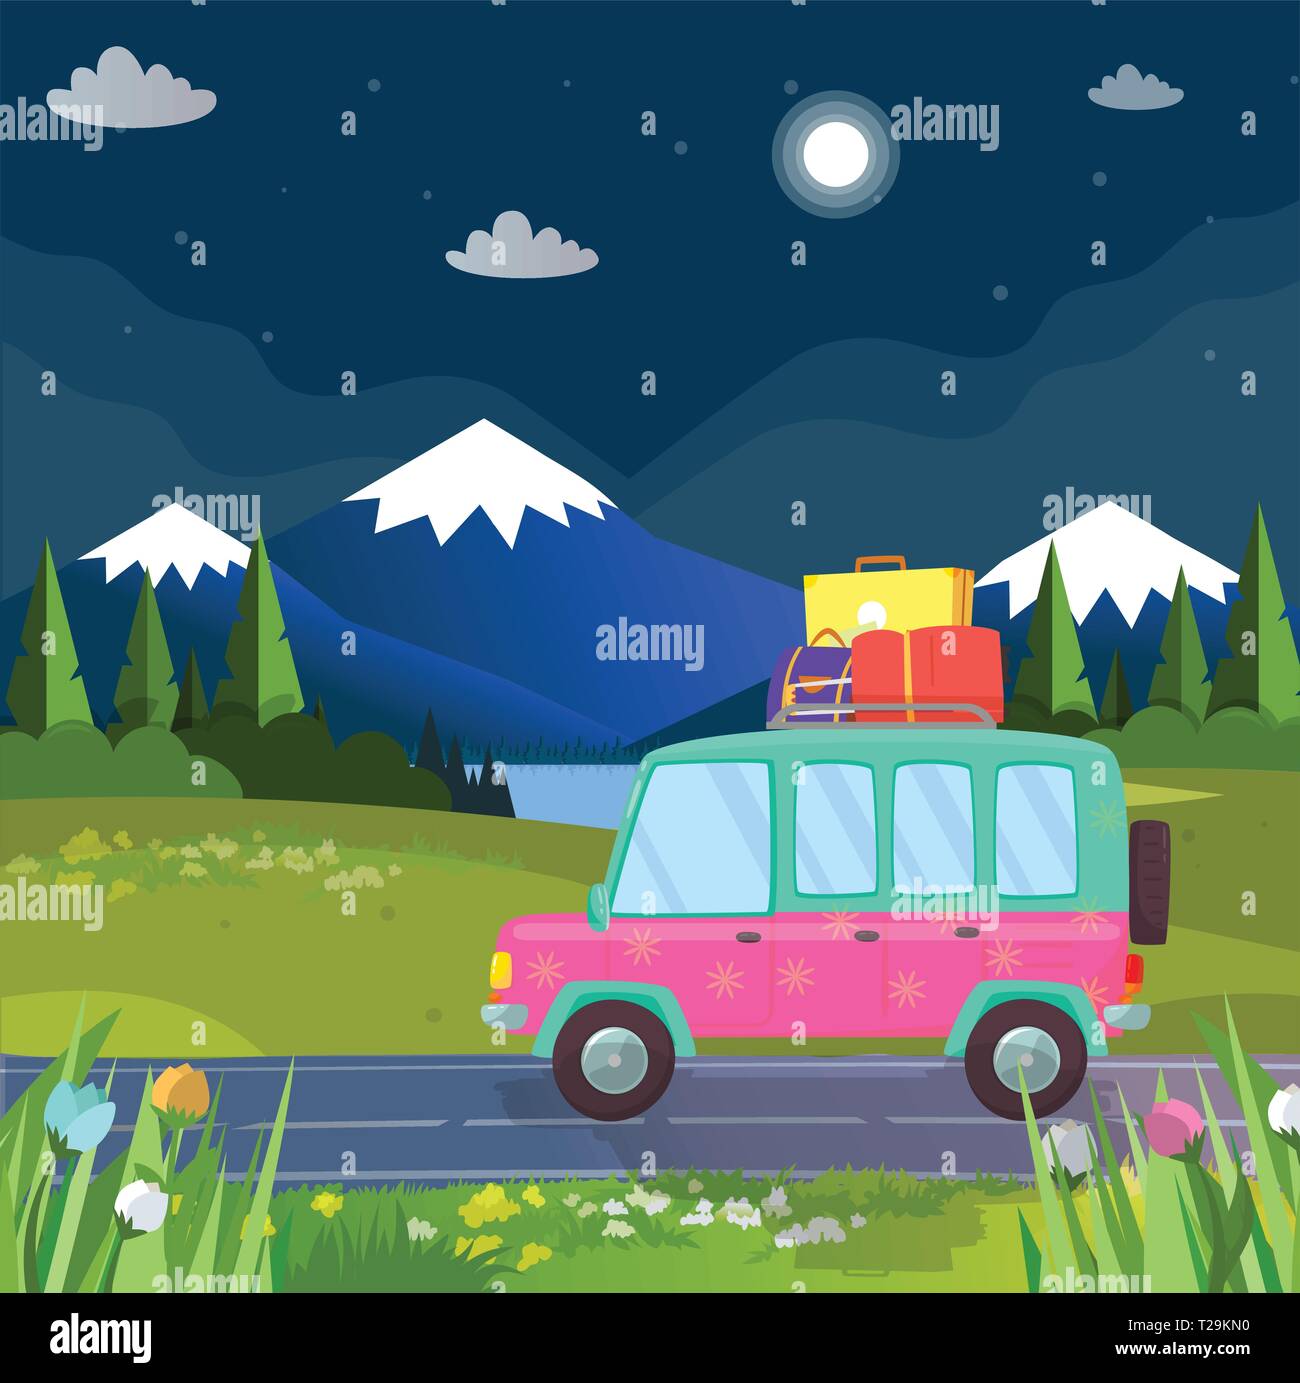 Family Travel by Hatchback Car at Highland. Holiday Trip, Journey at Nature with Luggage. Traveling Vacation. Tourist Transport on Road. Night Traveli Stock Vector